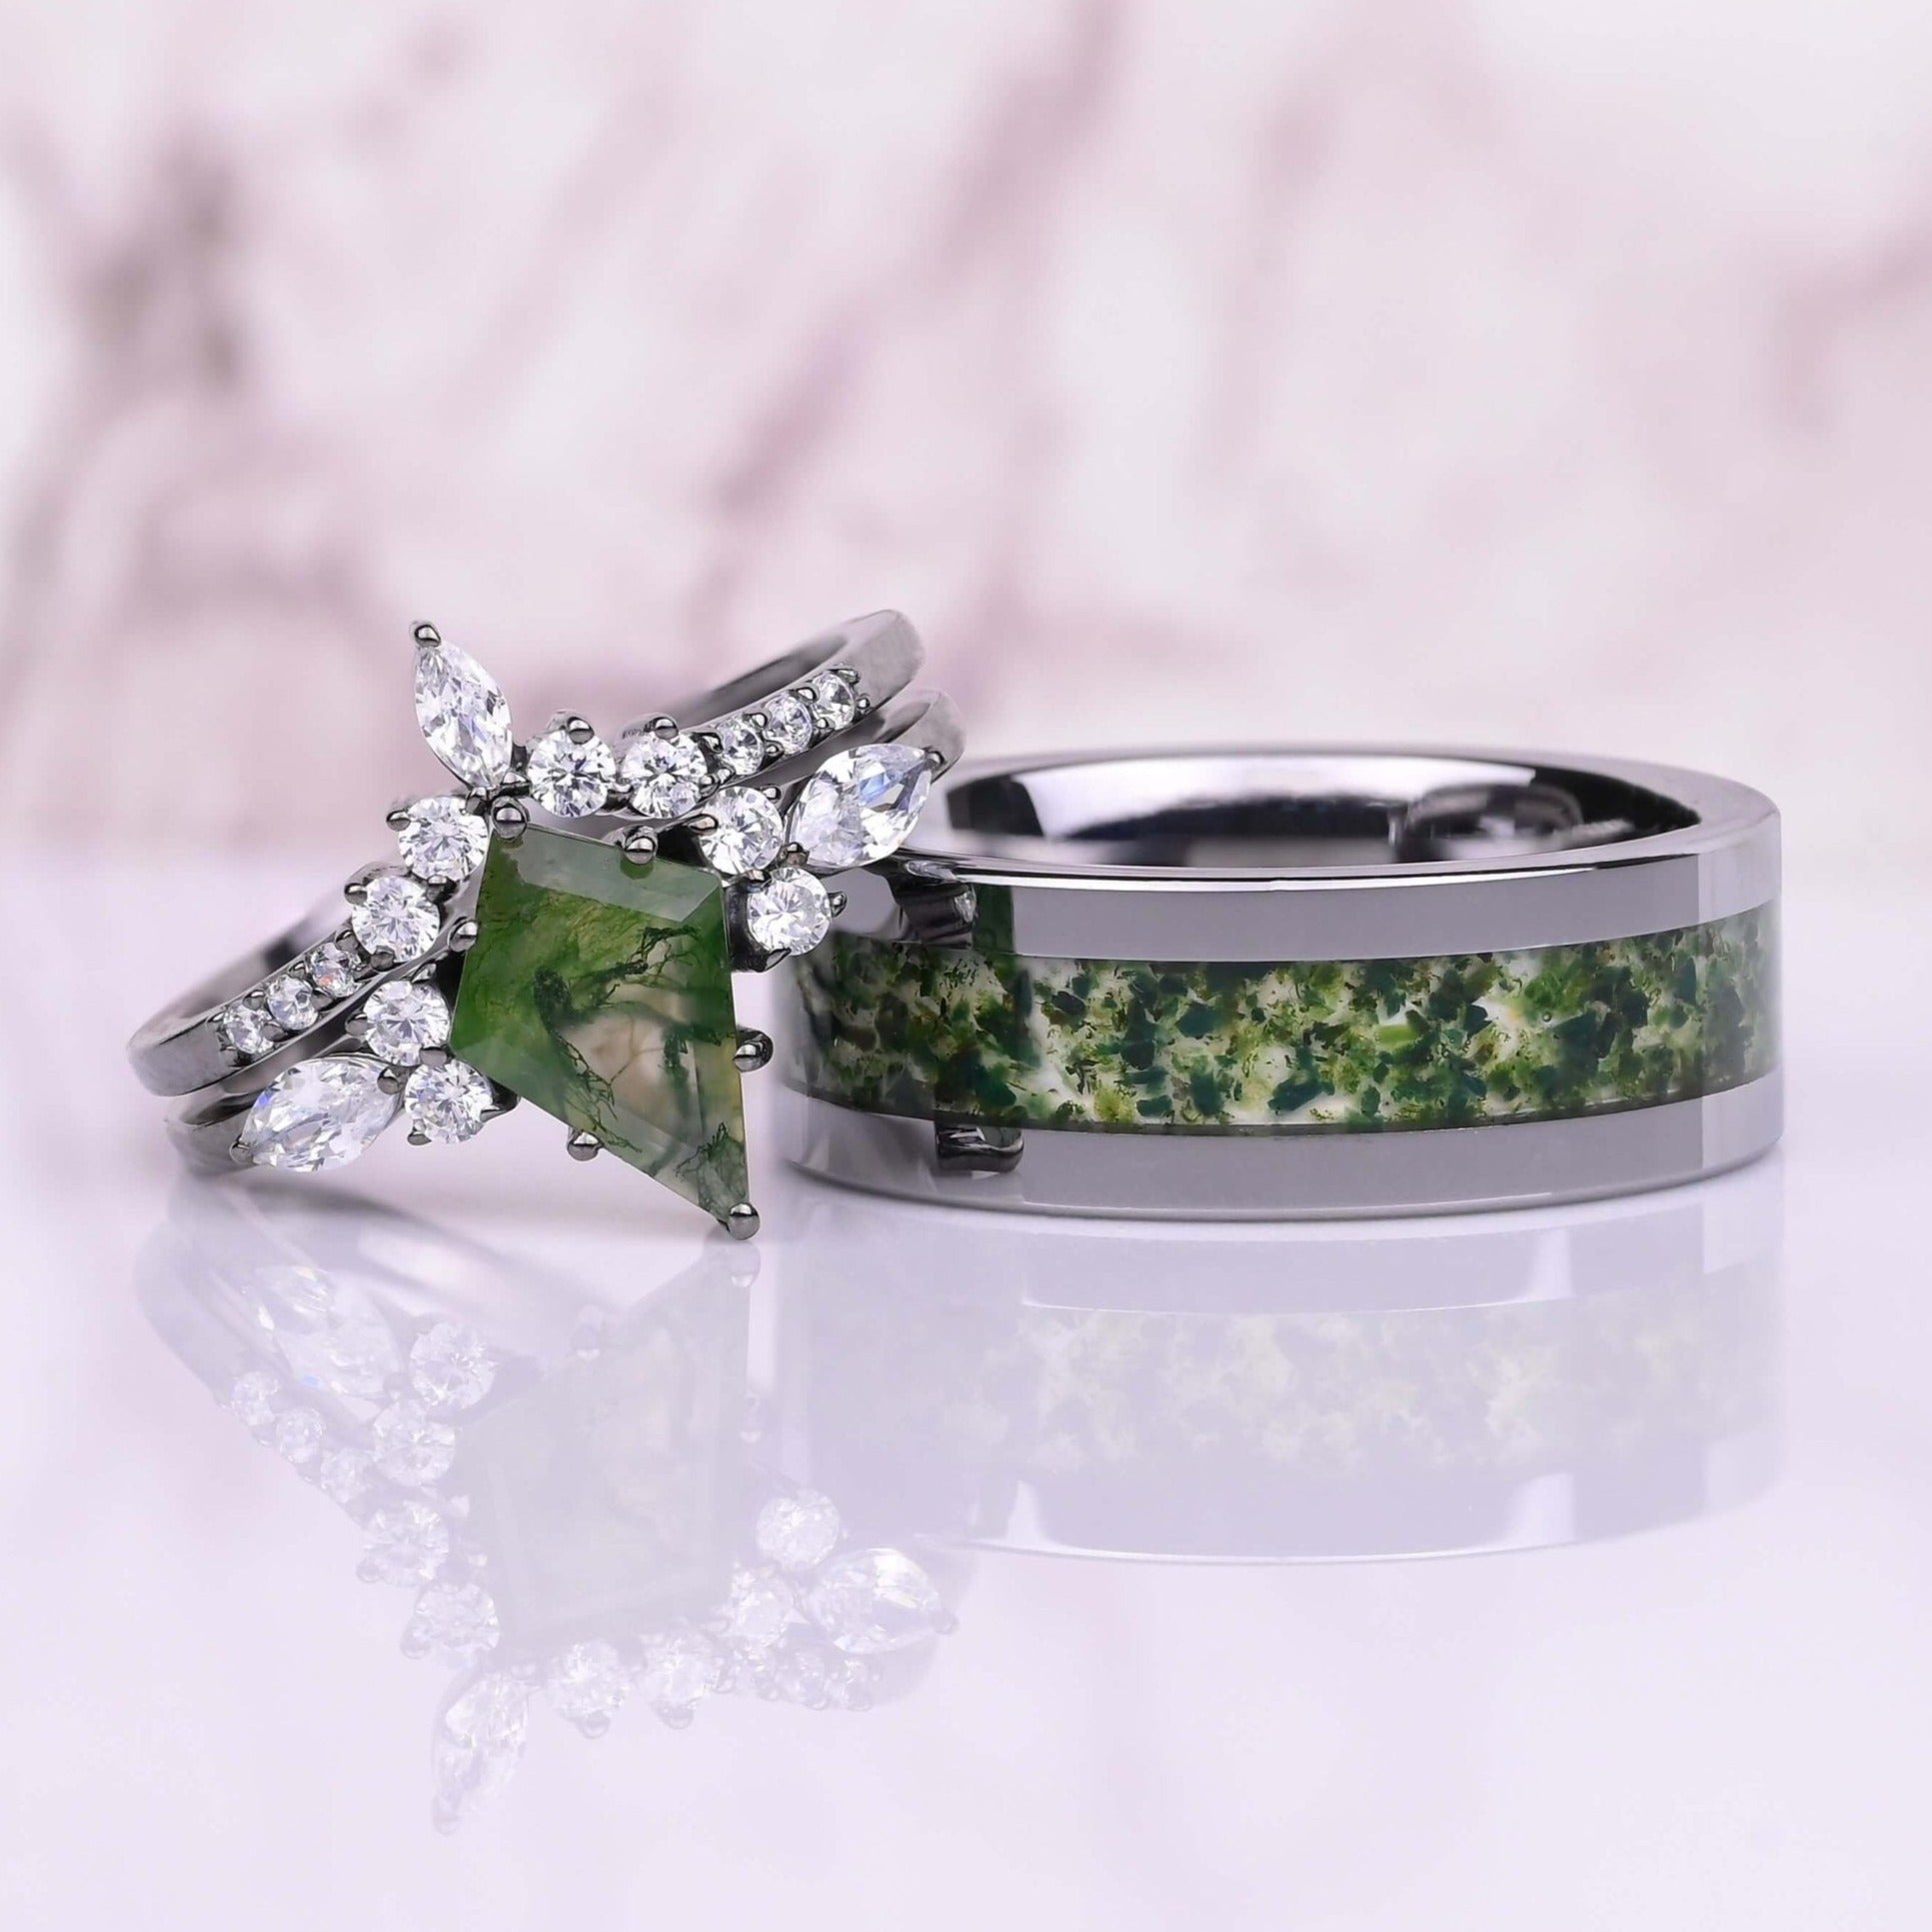 Moss Agate - Couple Ring Set - TUNSGTEN / 925 SILVER Rings - Green Moss Agate Inlay - Wedding Bands - Promise Ring